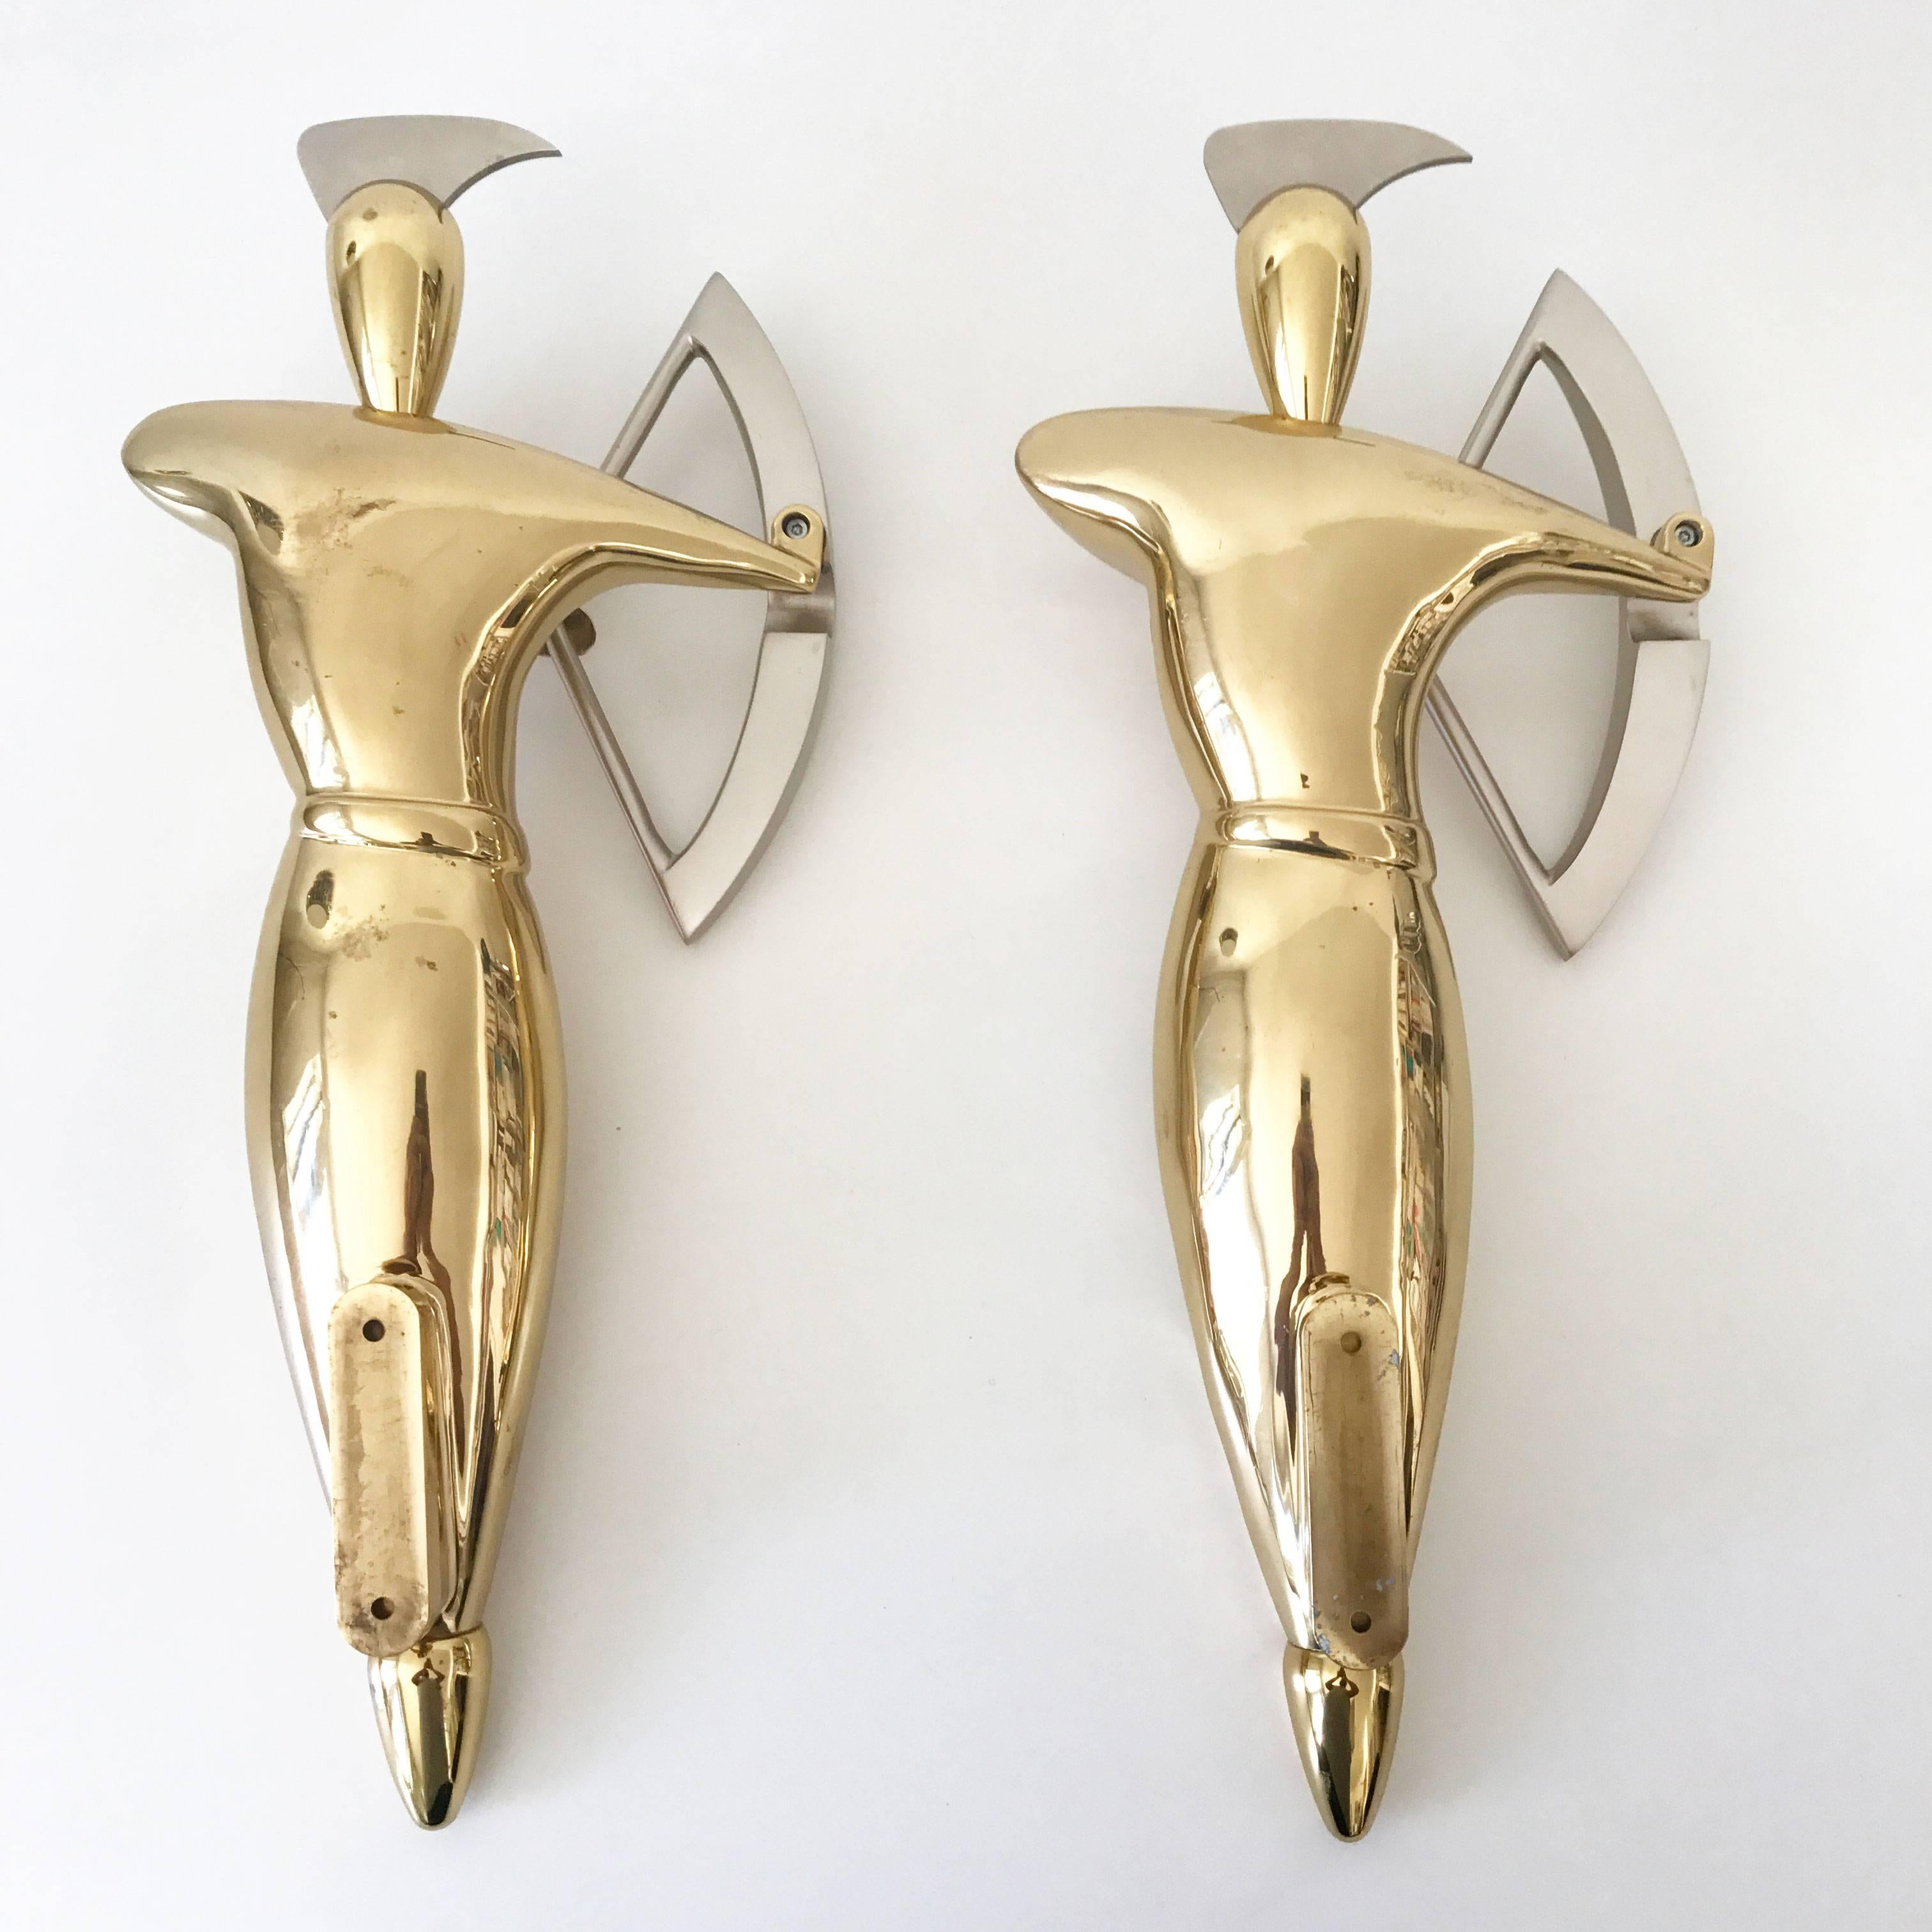 Set of two exceptional Hollywood Regency wall mount decorative brass and steel archers. 
Designed and manufactured probably in 1980s. Not marked.

Executed in massive brass and steel.

Condition:
Good  original vintage condition. Wear consistent